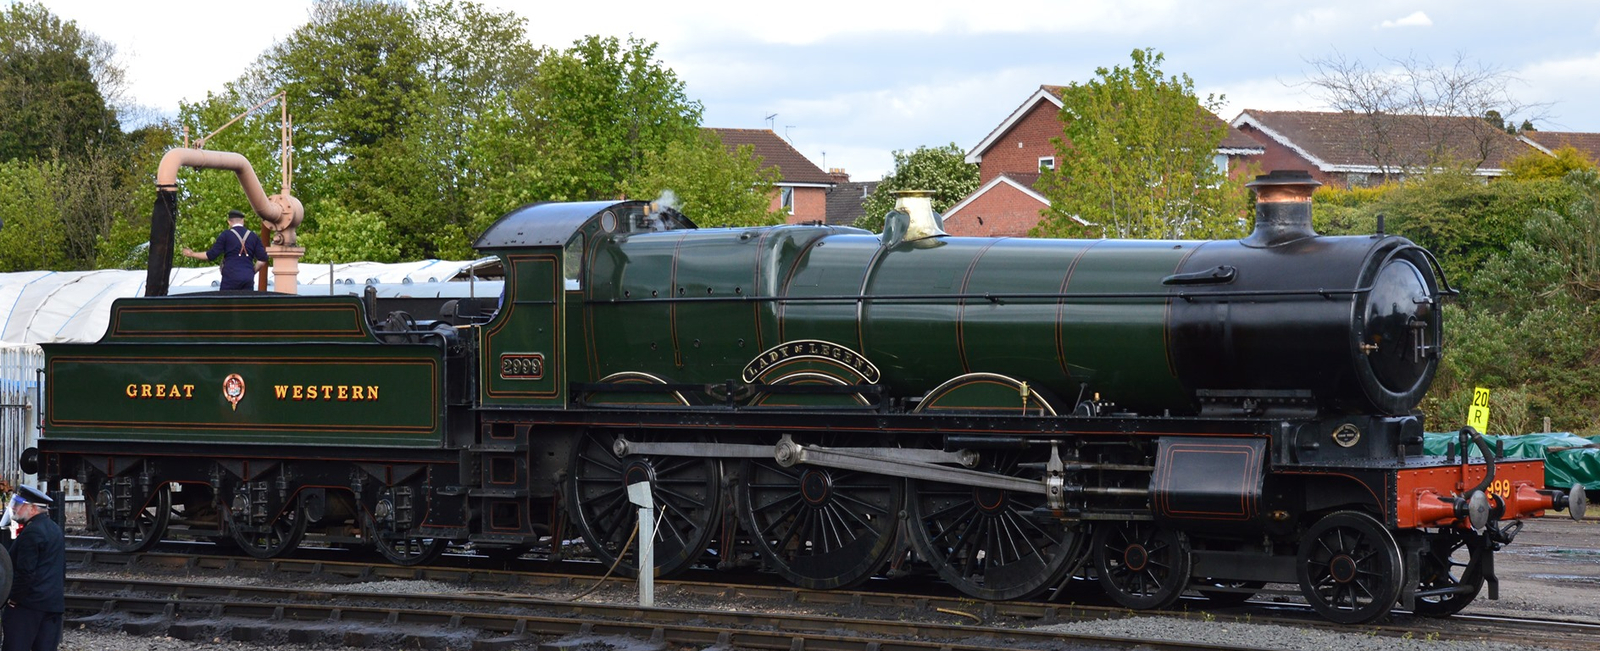 No. 2999 “Lady of Legend” in May 2021 in Kidderminster